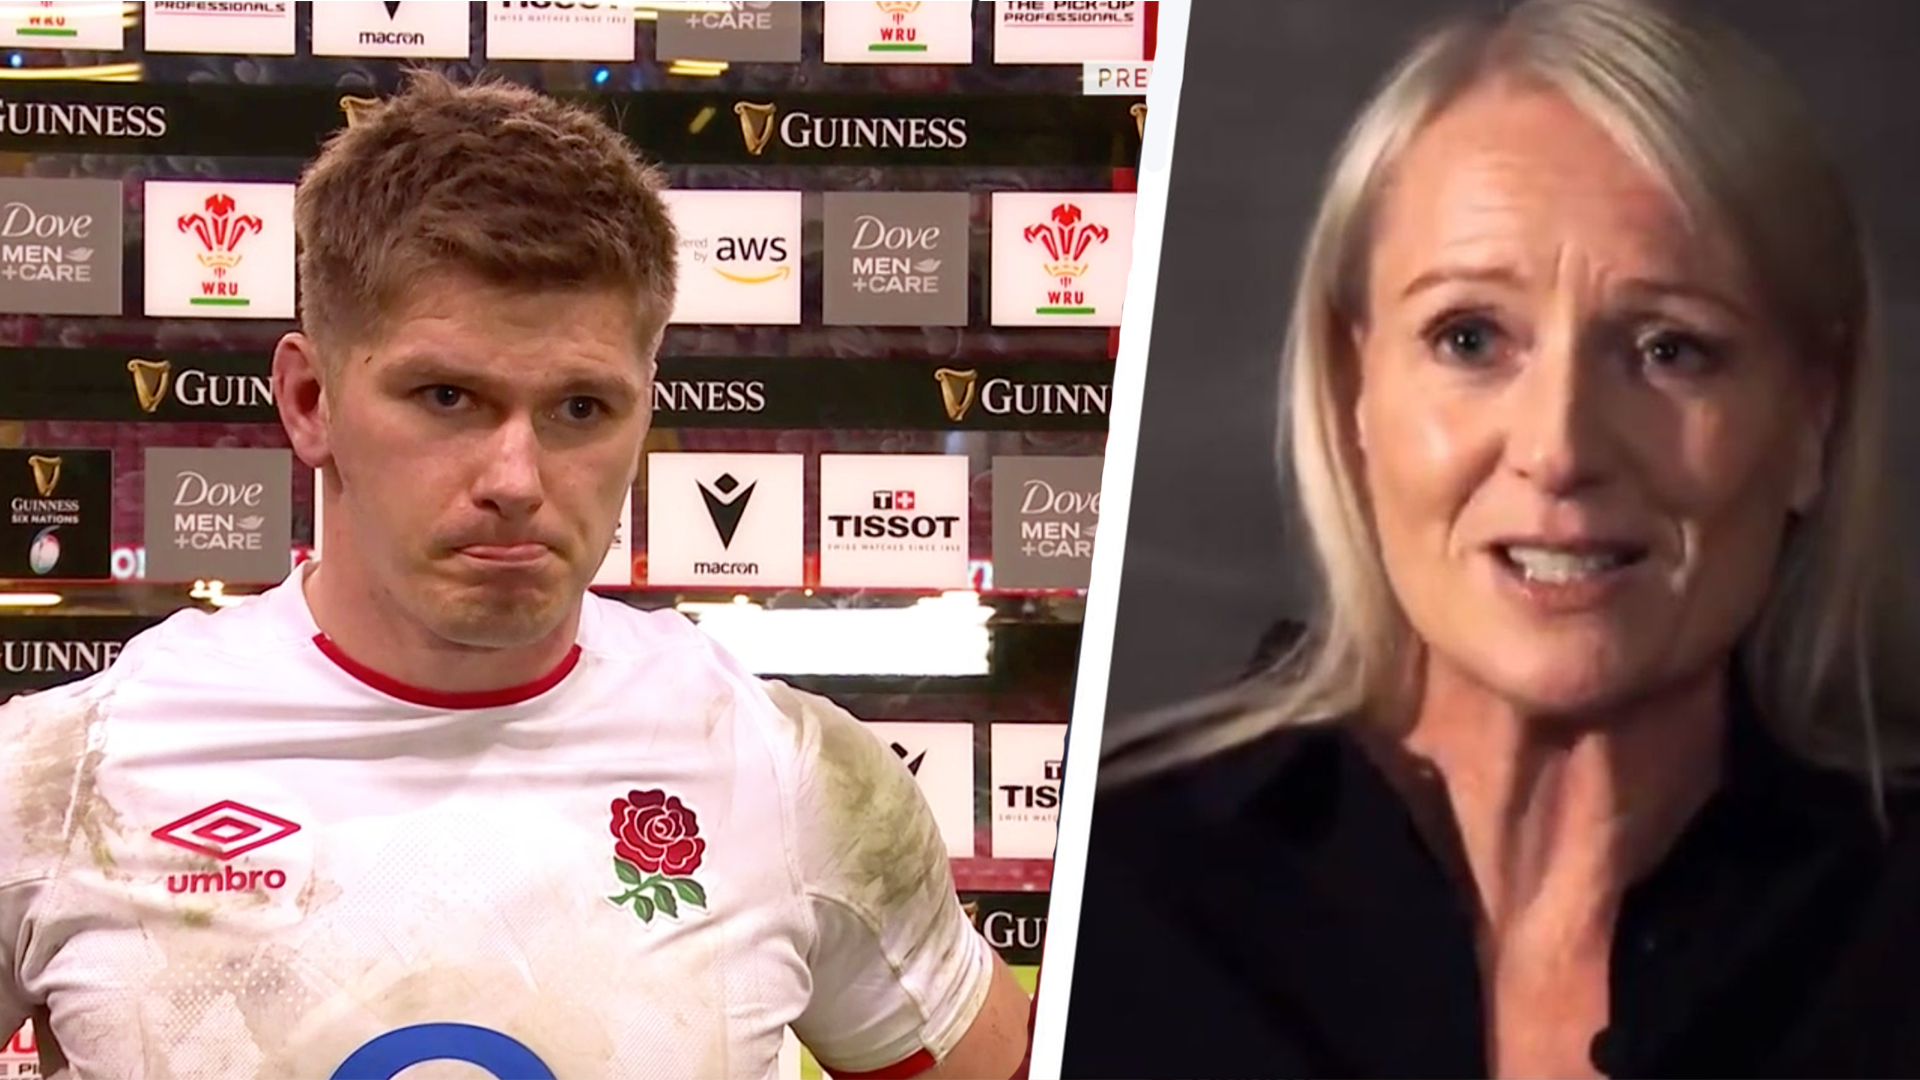 'In my car crying, hope you're happy' - Sonja Mclaughlan posts tragic tweet following England interview